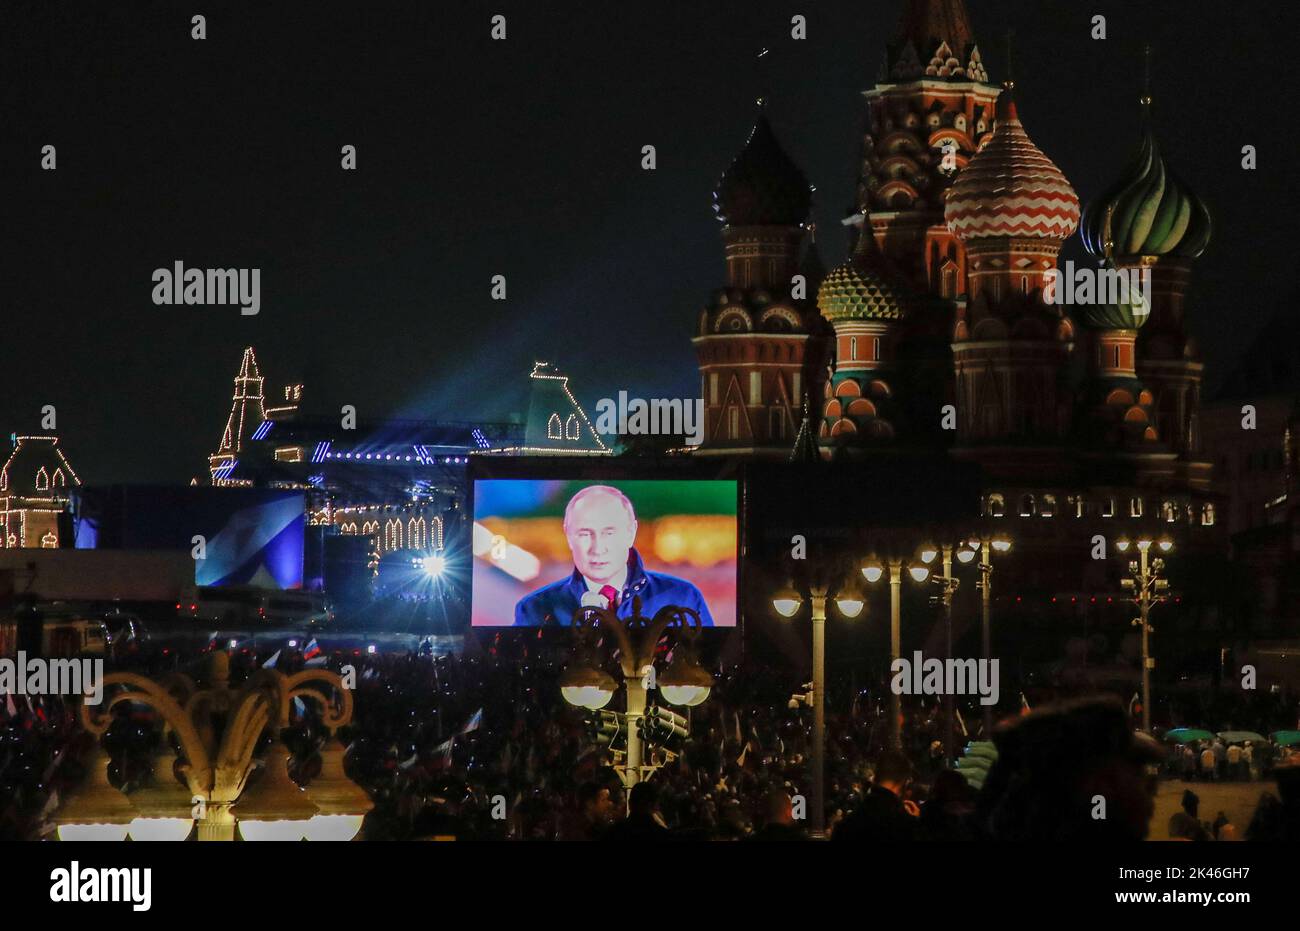 Russian President Vladimir Putin is seen on a screen during the broadcast of a concert marking the declared annexation of the Russian-controlled territories of four Ukraine's Donetsk, Luhansk, Kherson and Zaporizhzhia regions, after holding what Russian authorities called referendums in the occupied areas of Ukraine that were condemned by Kyiv and governments worldwide, near St. Basil's Cathedral and Red Square in central Moscow, Russia, September 30, 2022. REUTERS/REUTERS PHOTOGRAPHER Stock Photo